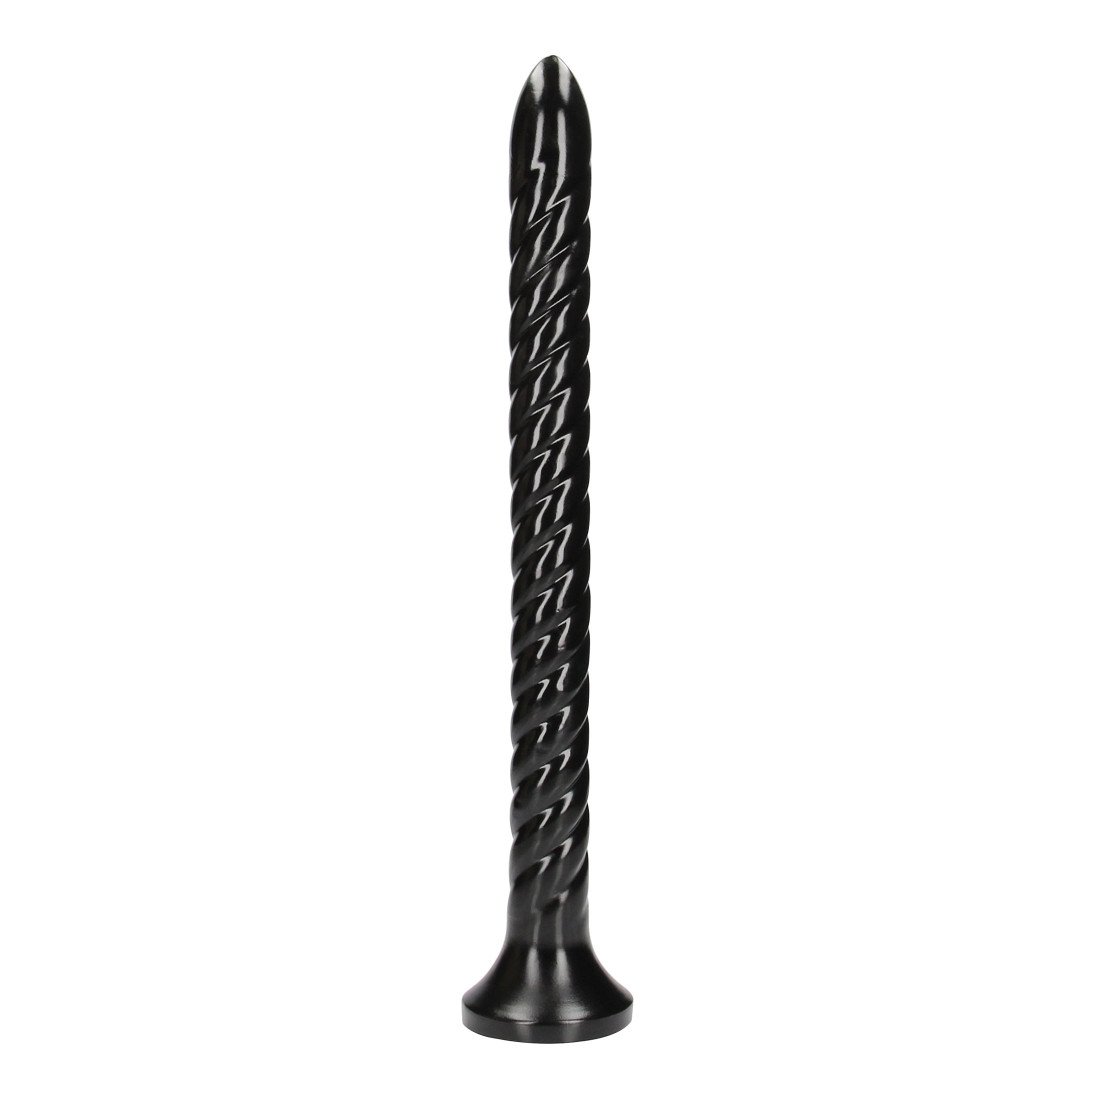 Analinis dildo „Swirled Anal Snake 16 Inch“ - Ouch!